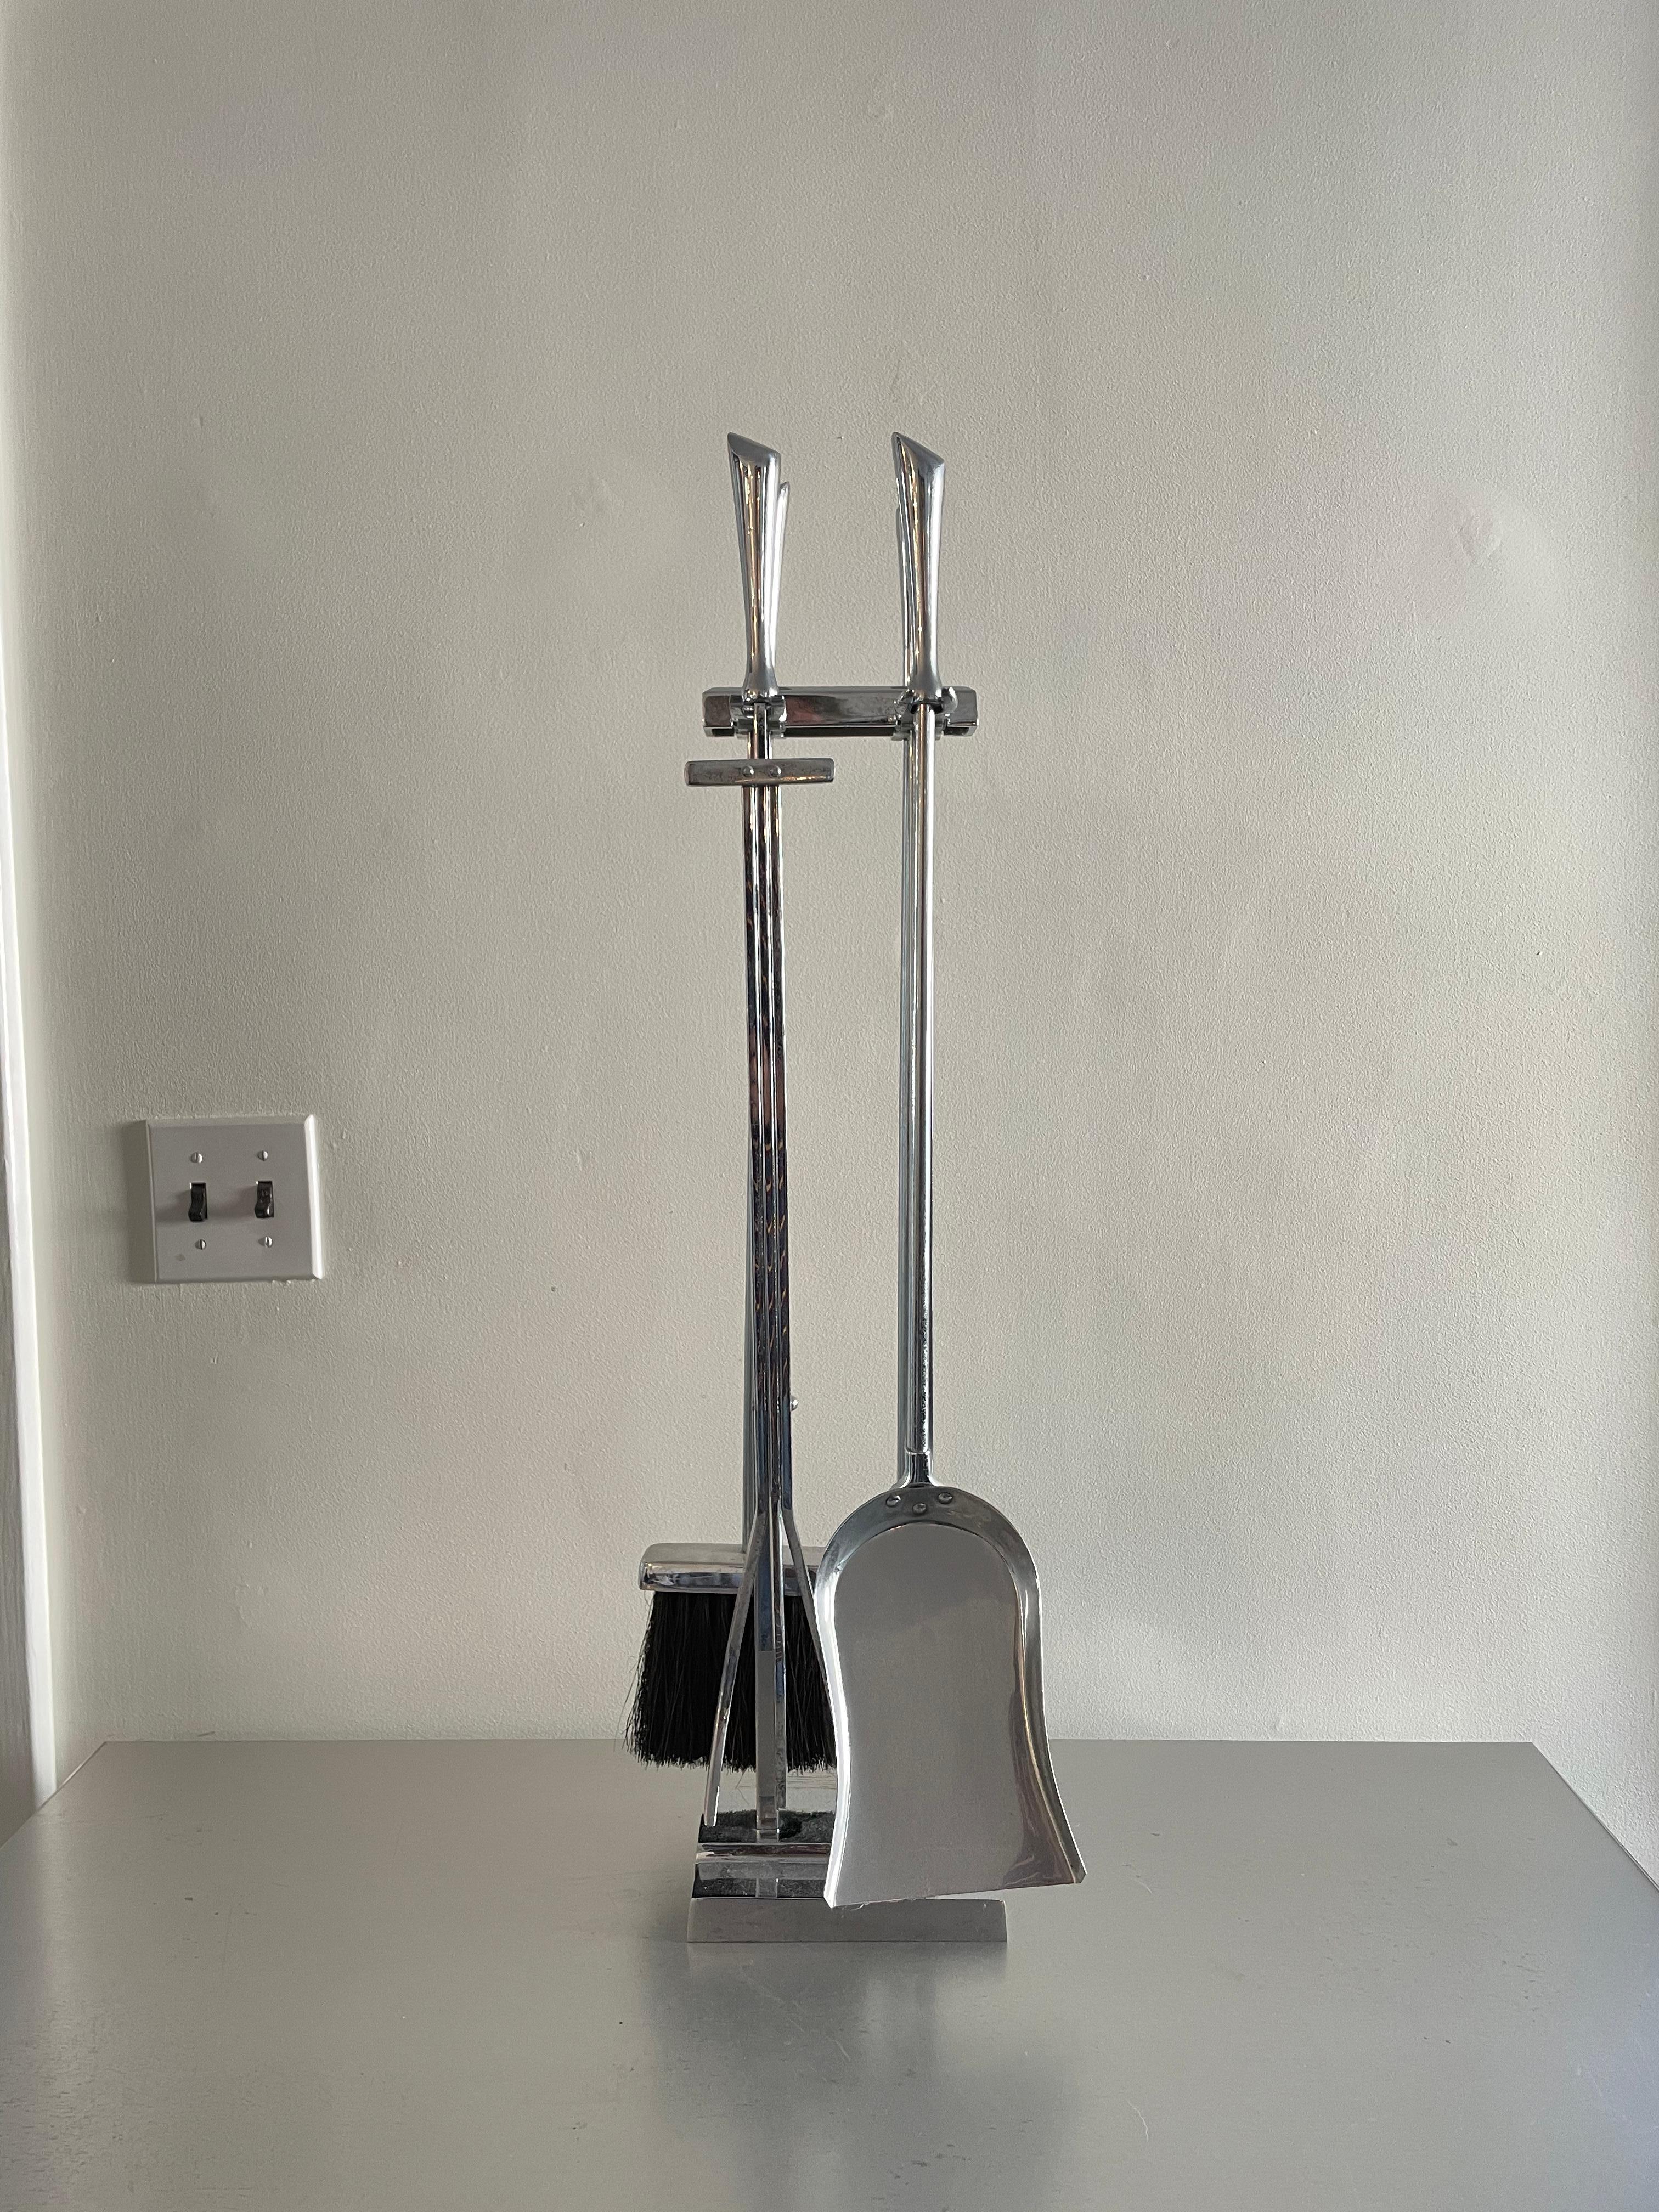 Mid-century chrome fireplace tools. Sleek handled tools rest in a modern streamline tool stand.